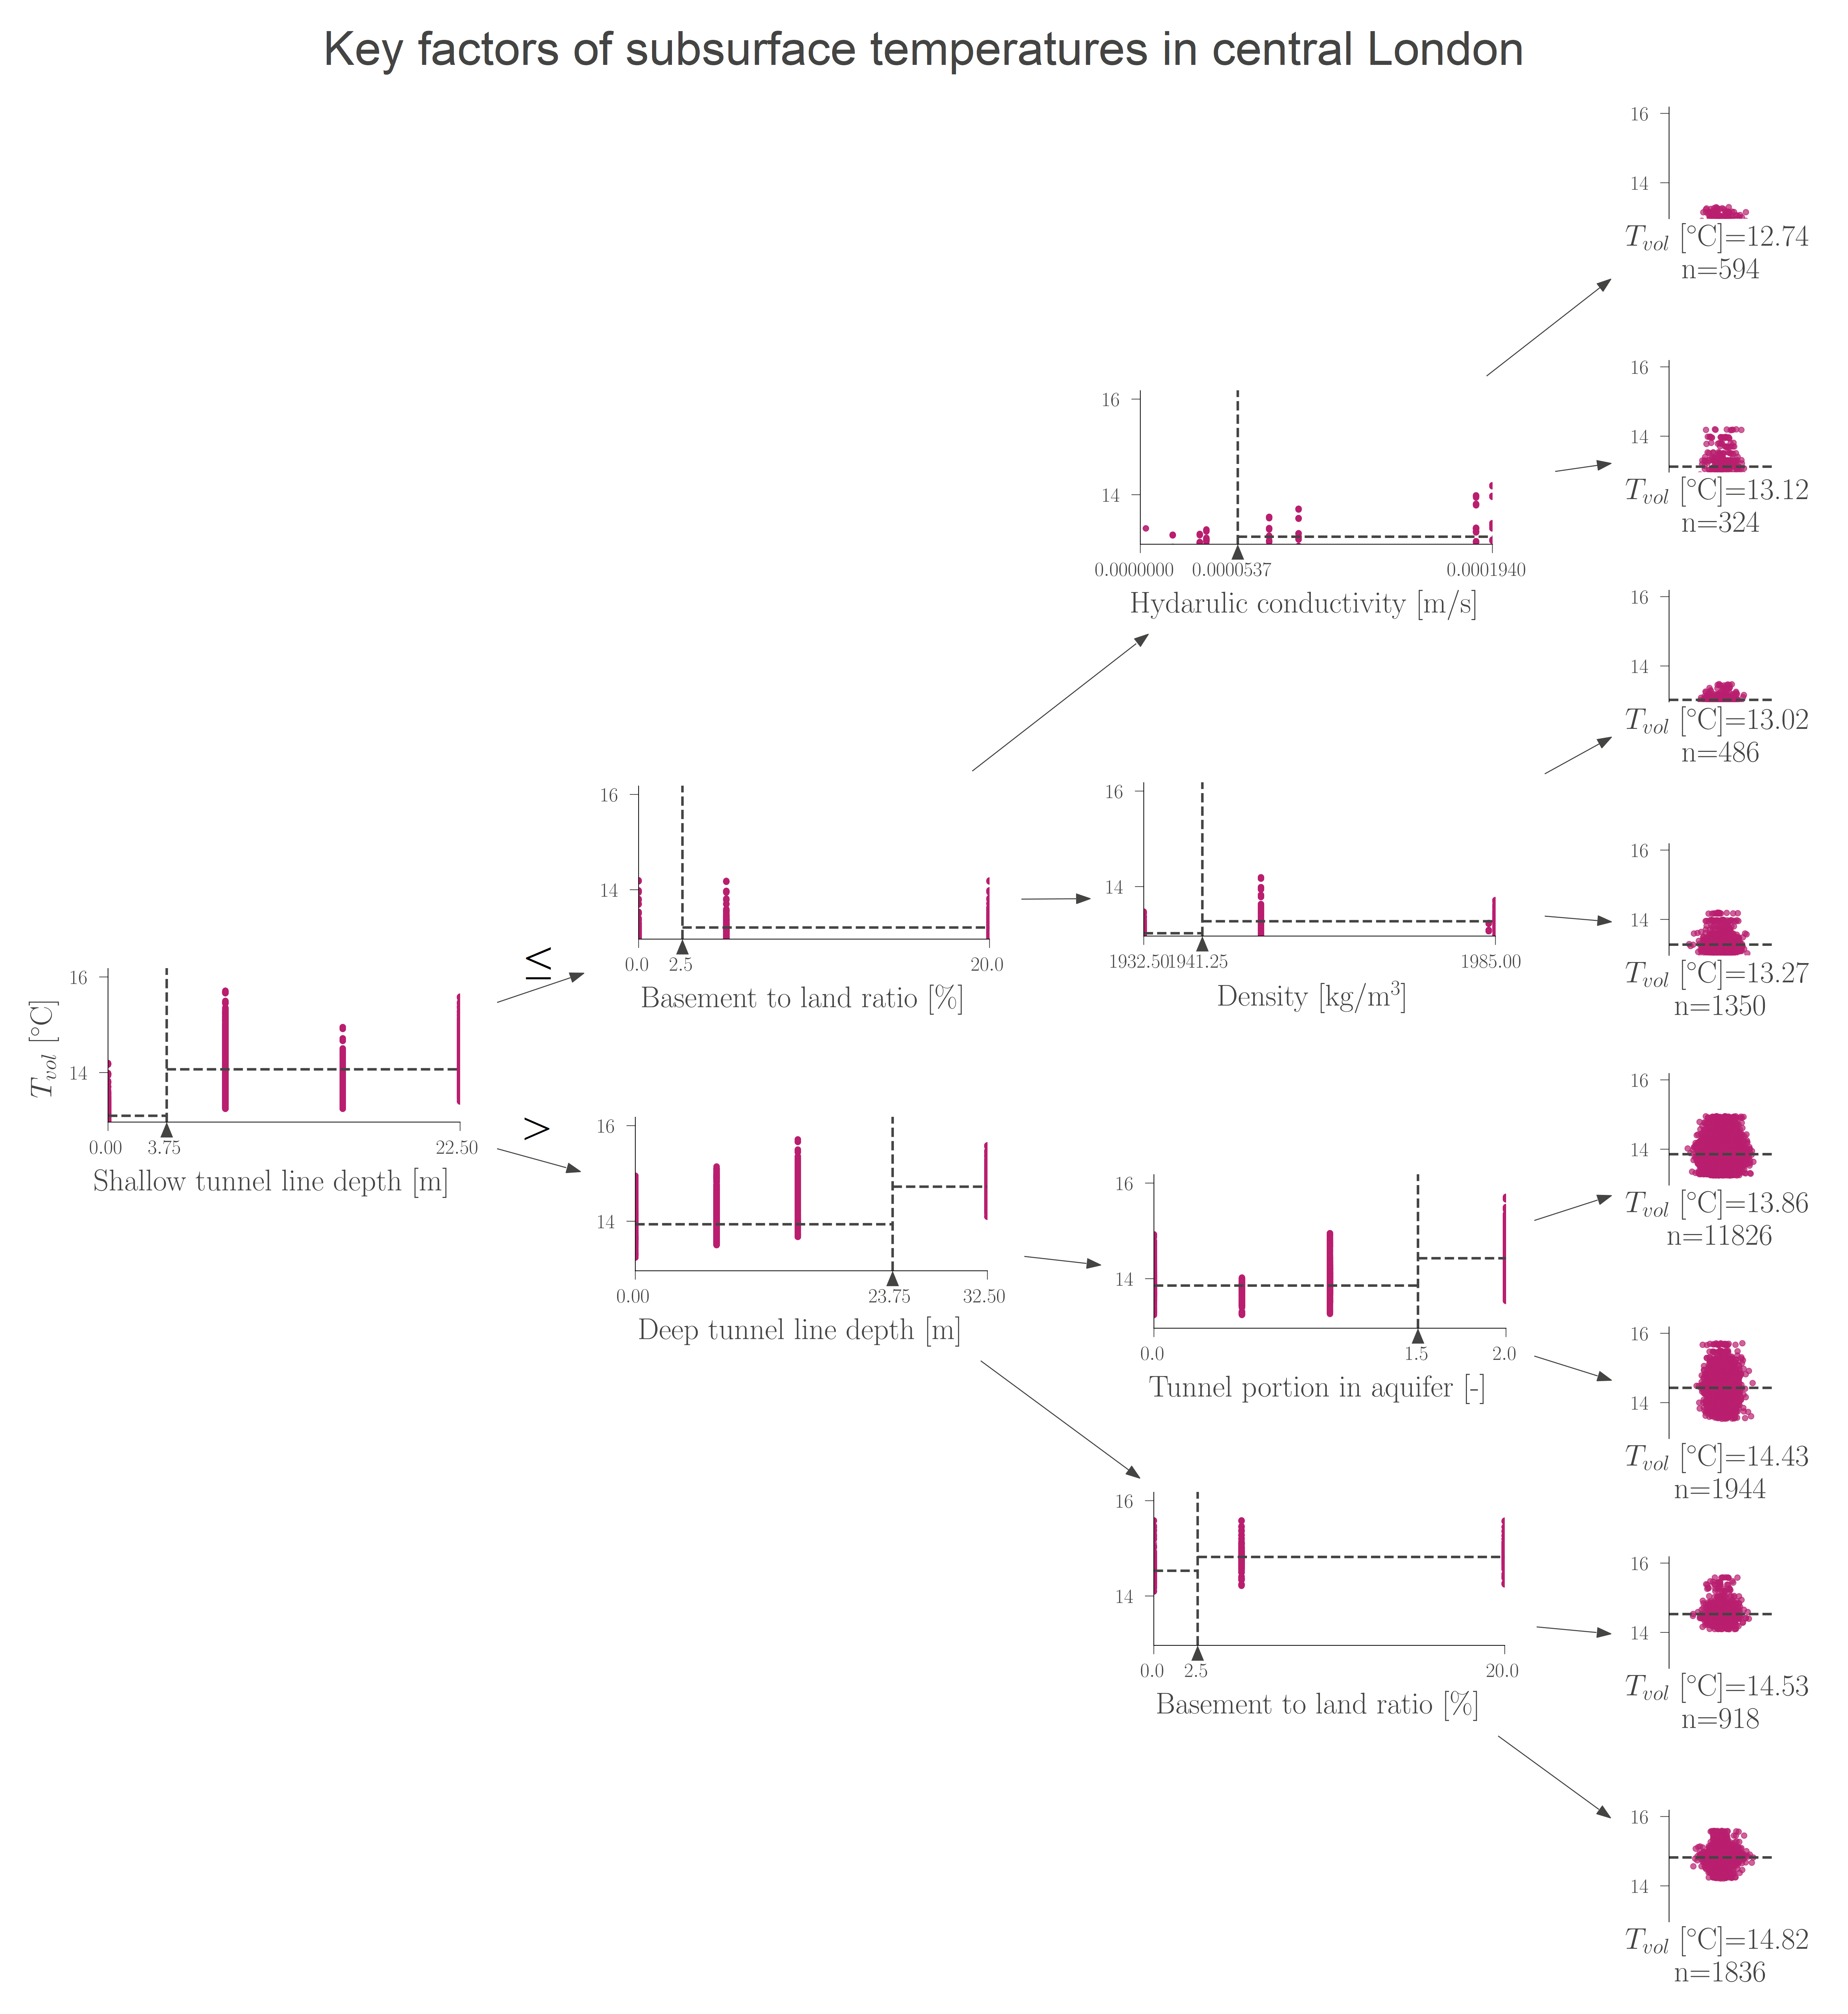 Regression tree for features in central London